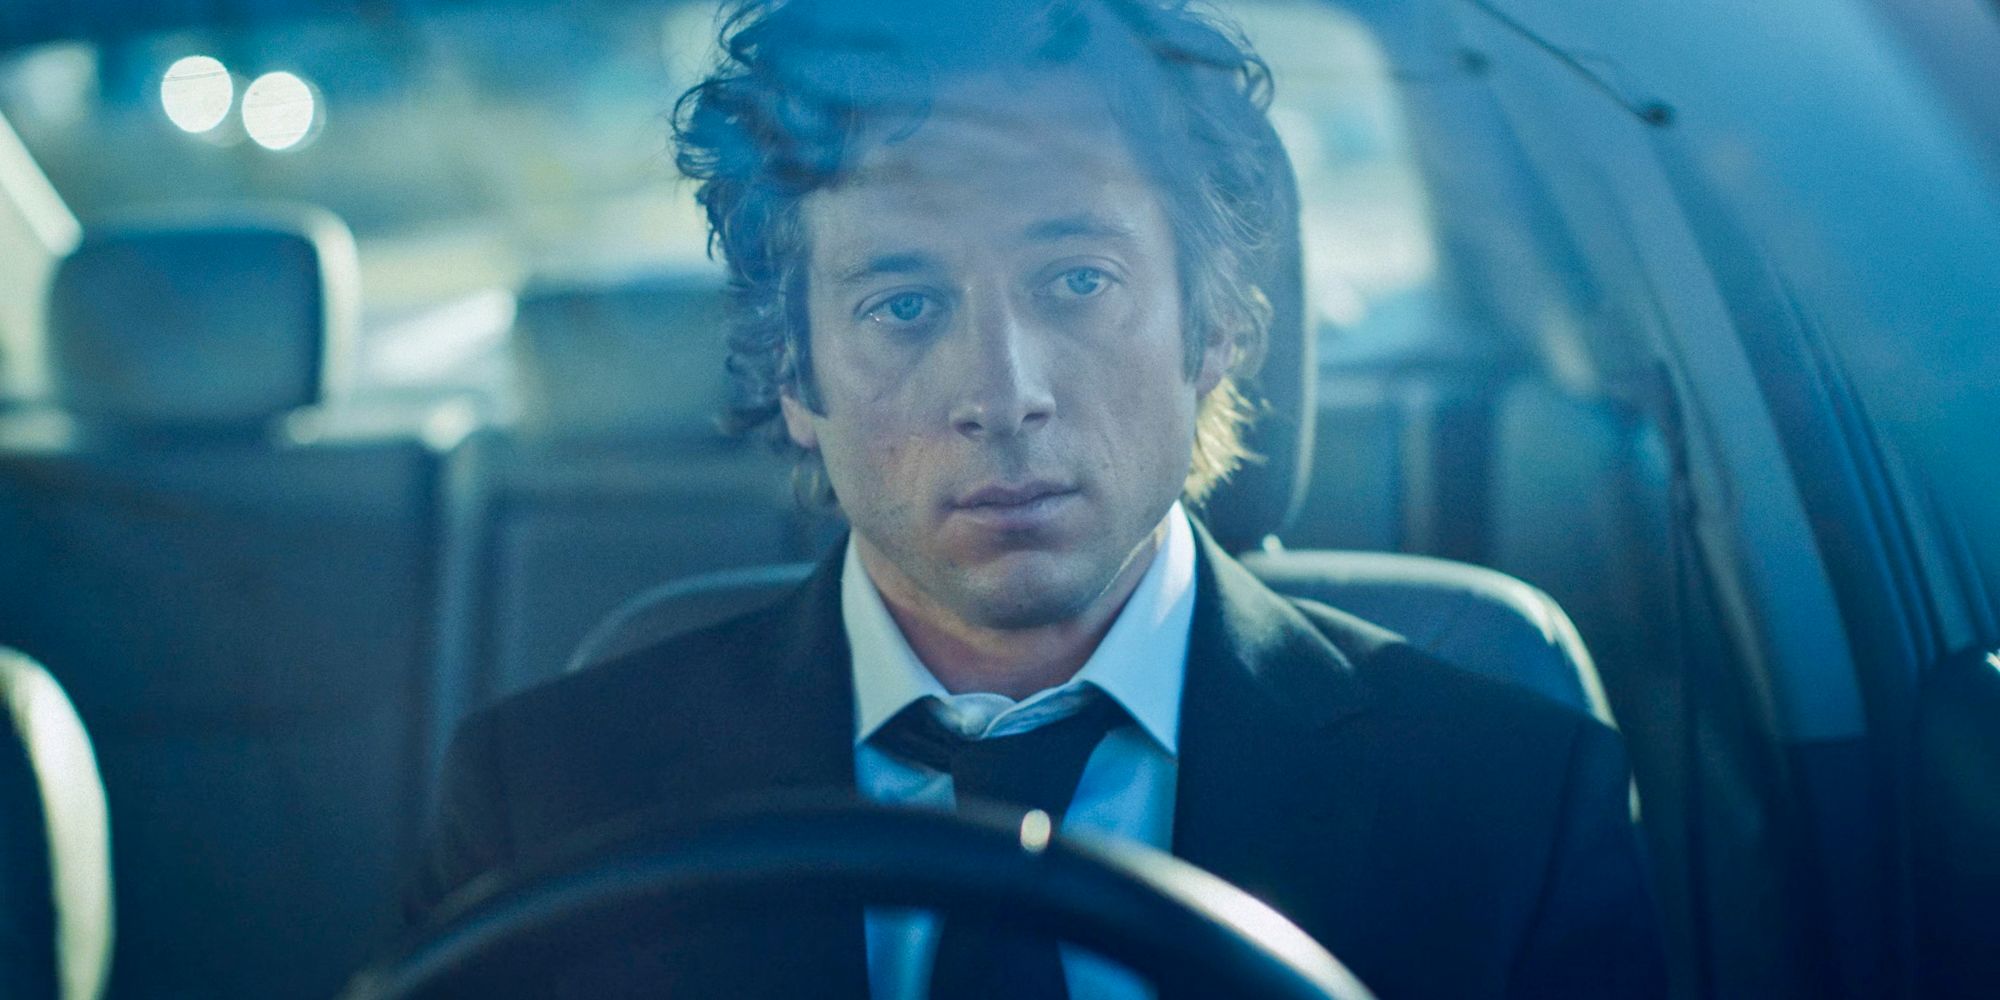 In a car, Carmy (Jeremy Allen White) watches the funeral of Michael from a distance in The Bear Season 3 Episode 1